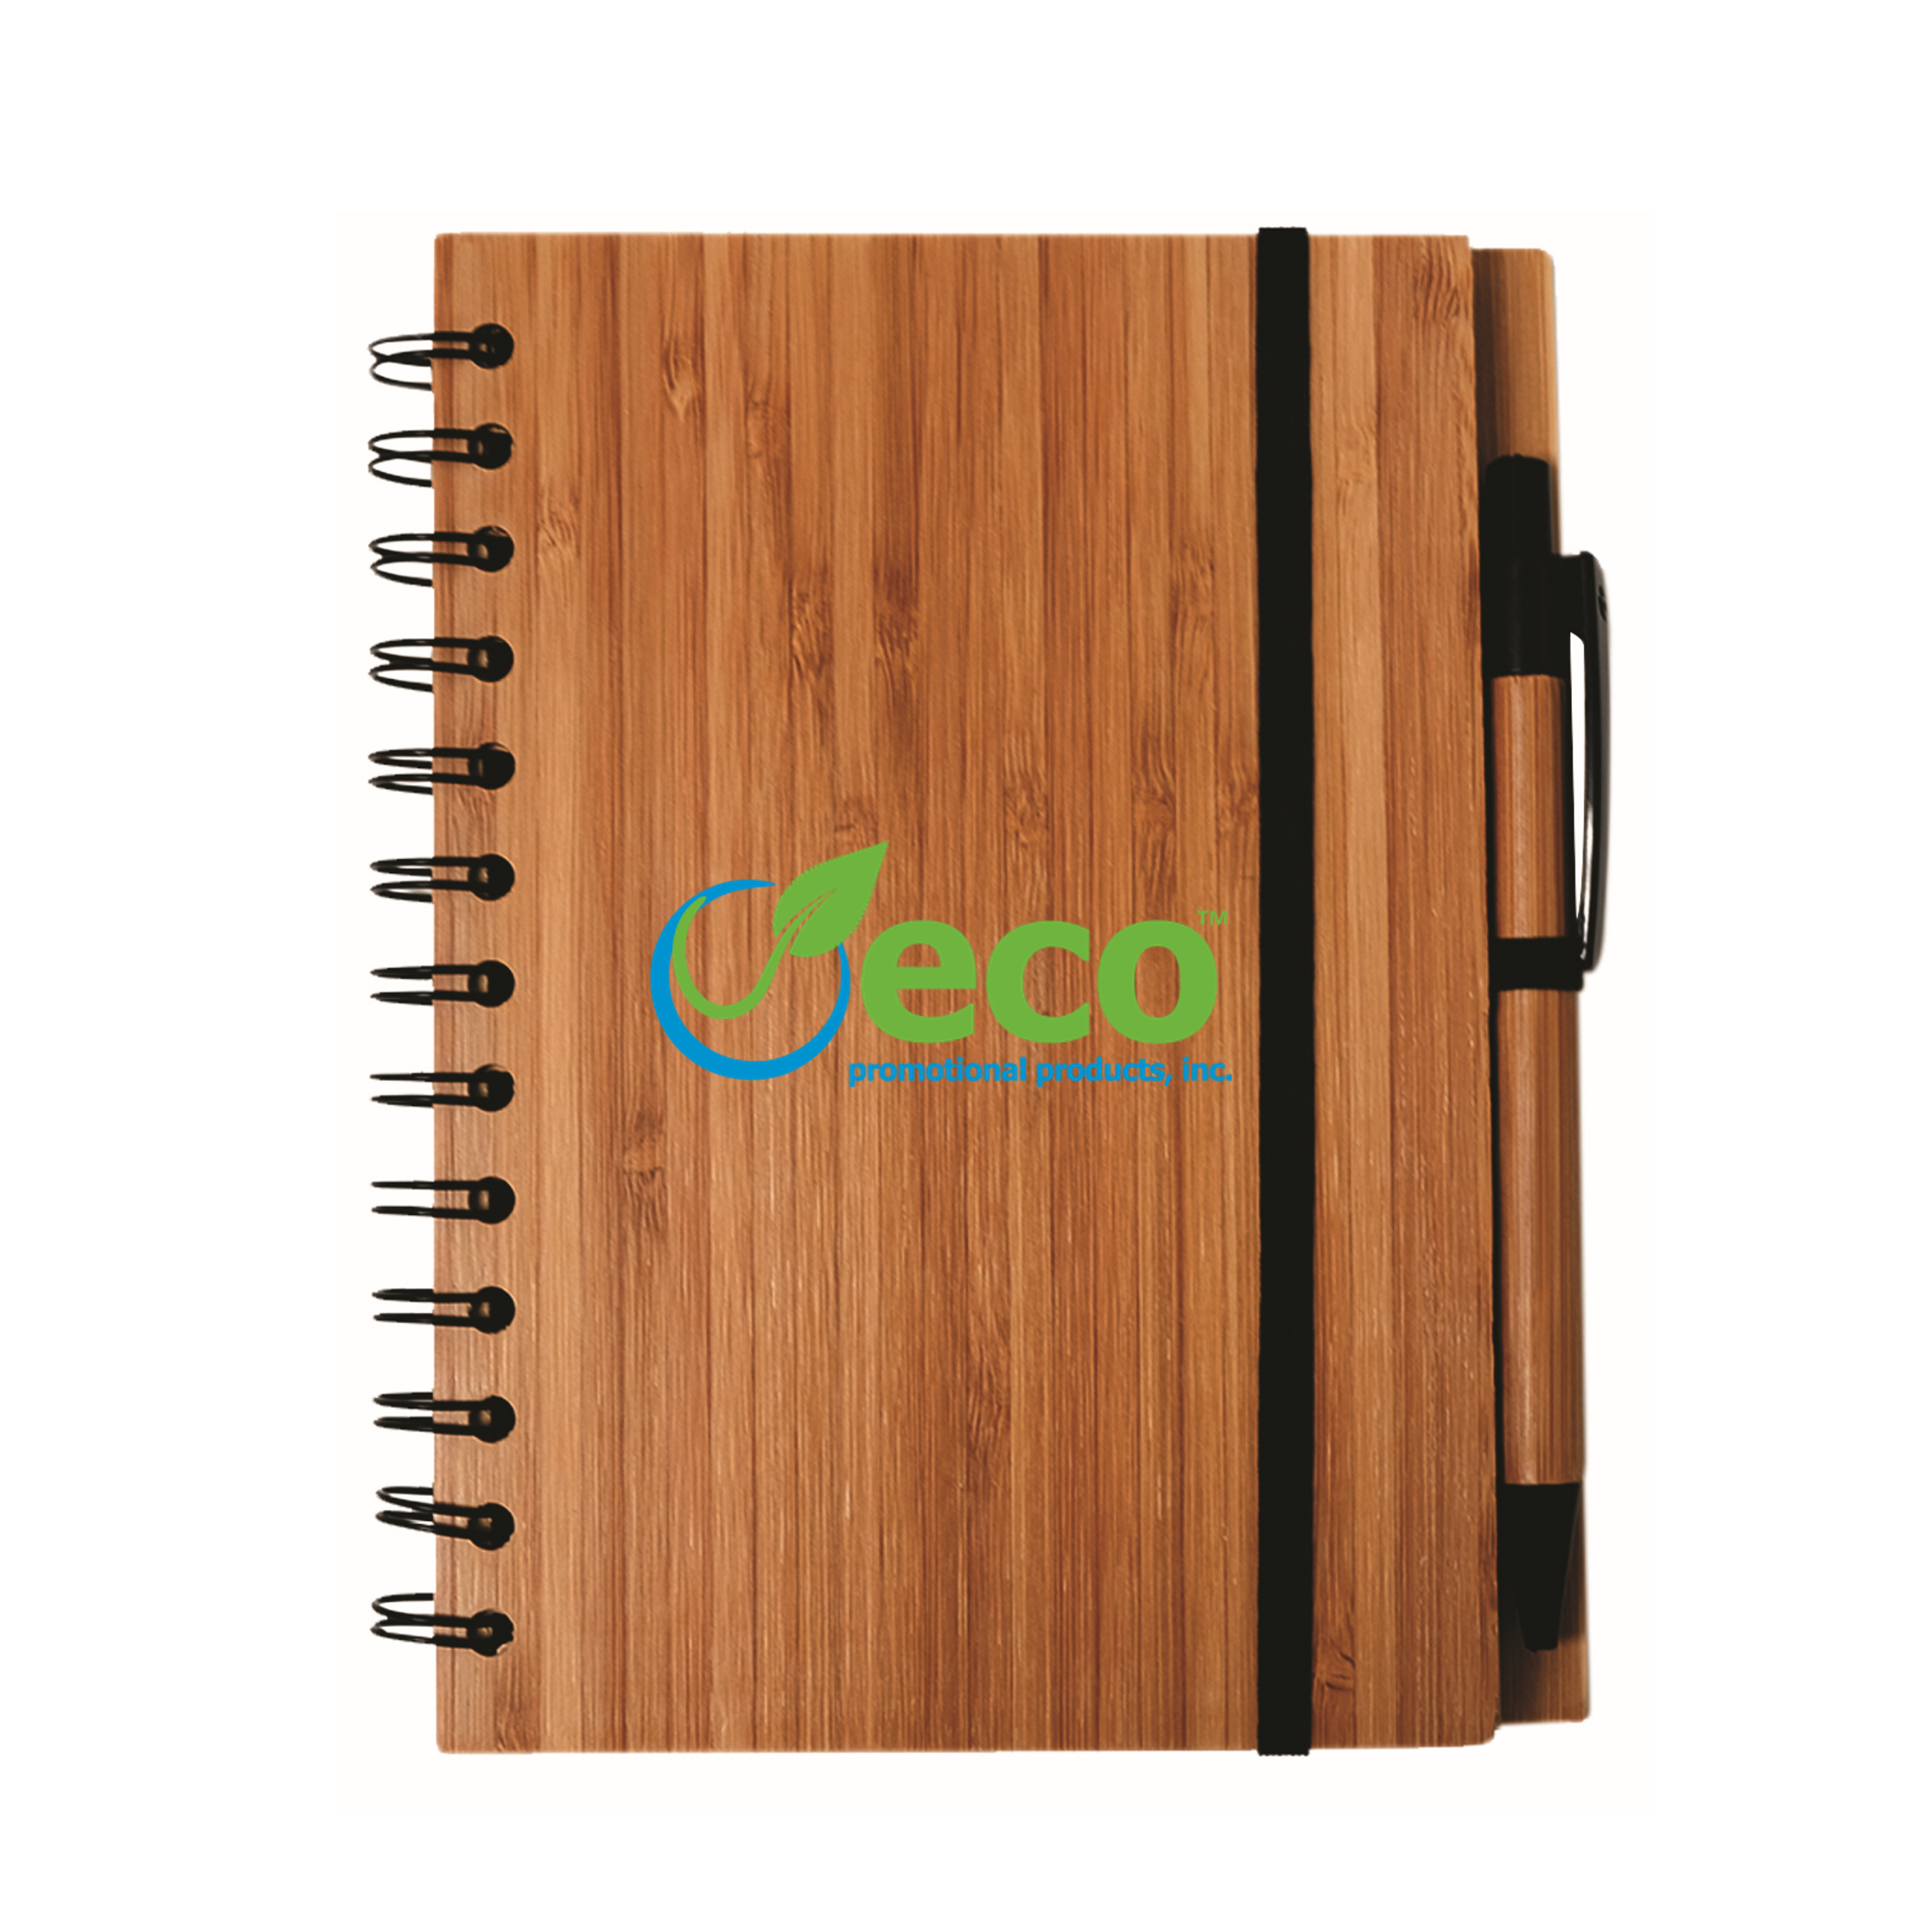 Bamboo Notebook and Pen Recycled | 5x7 